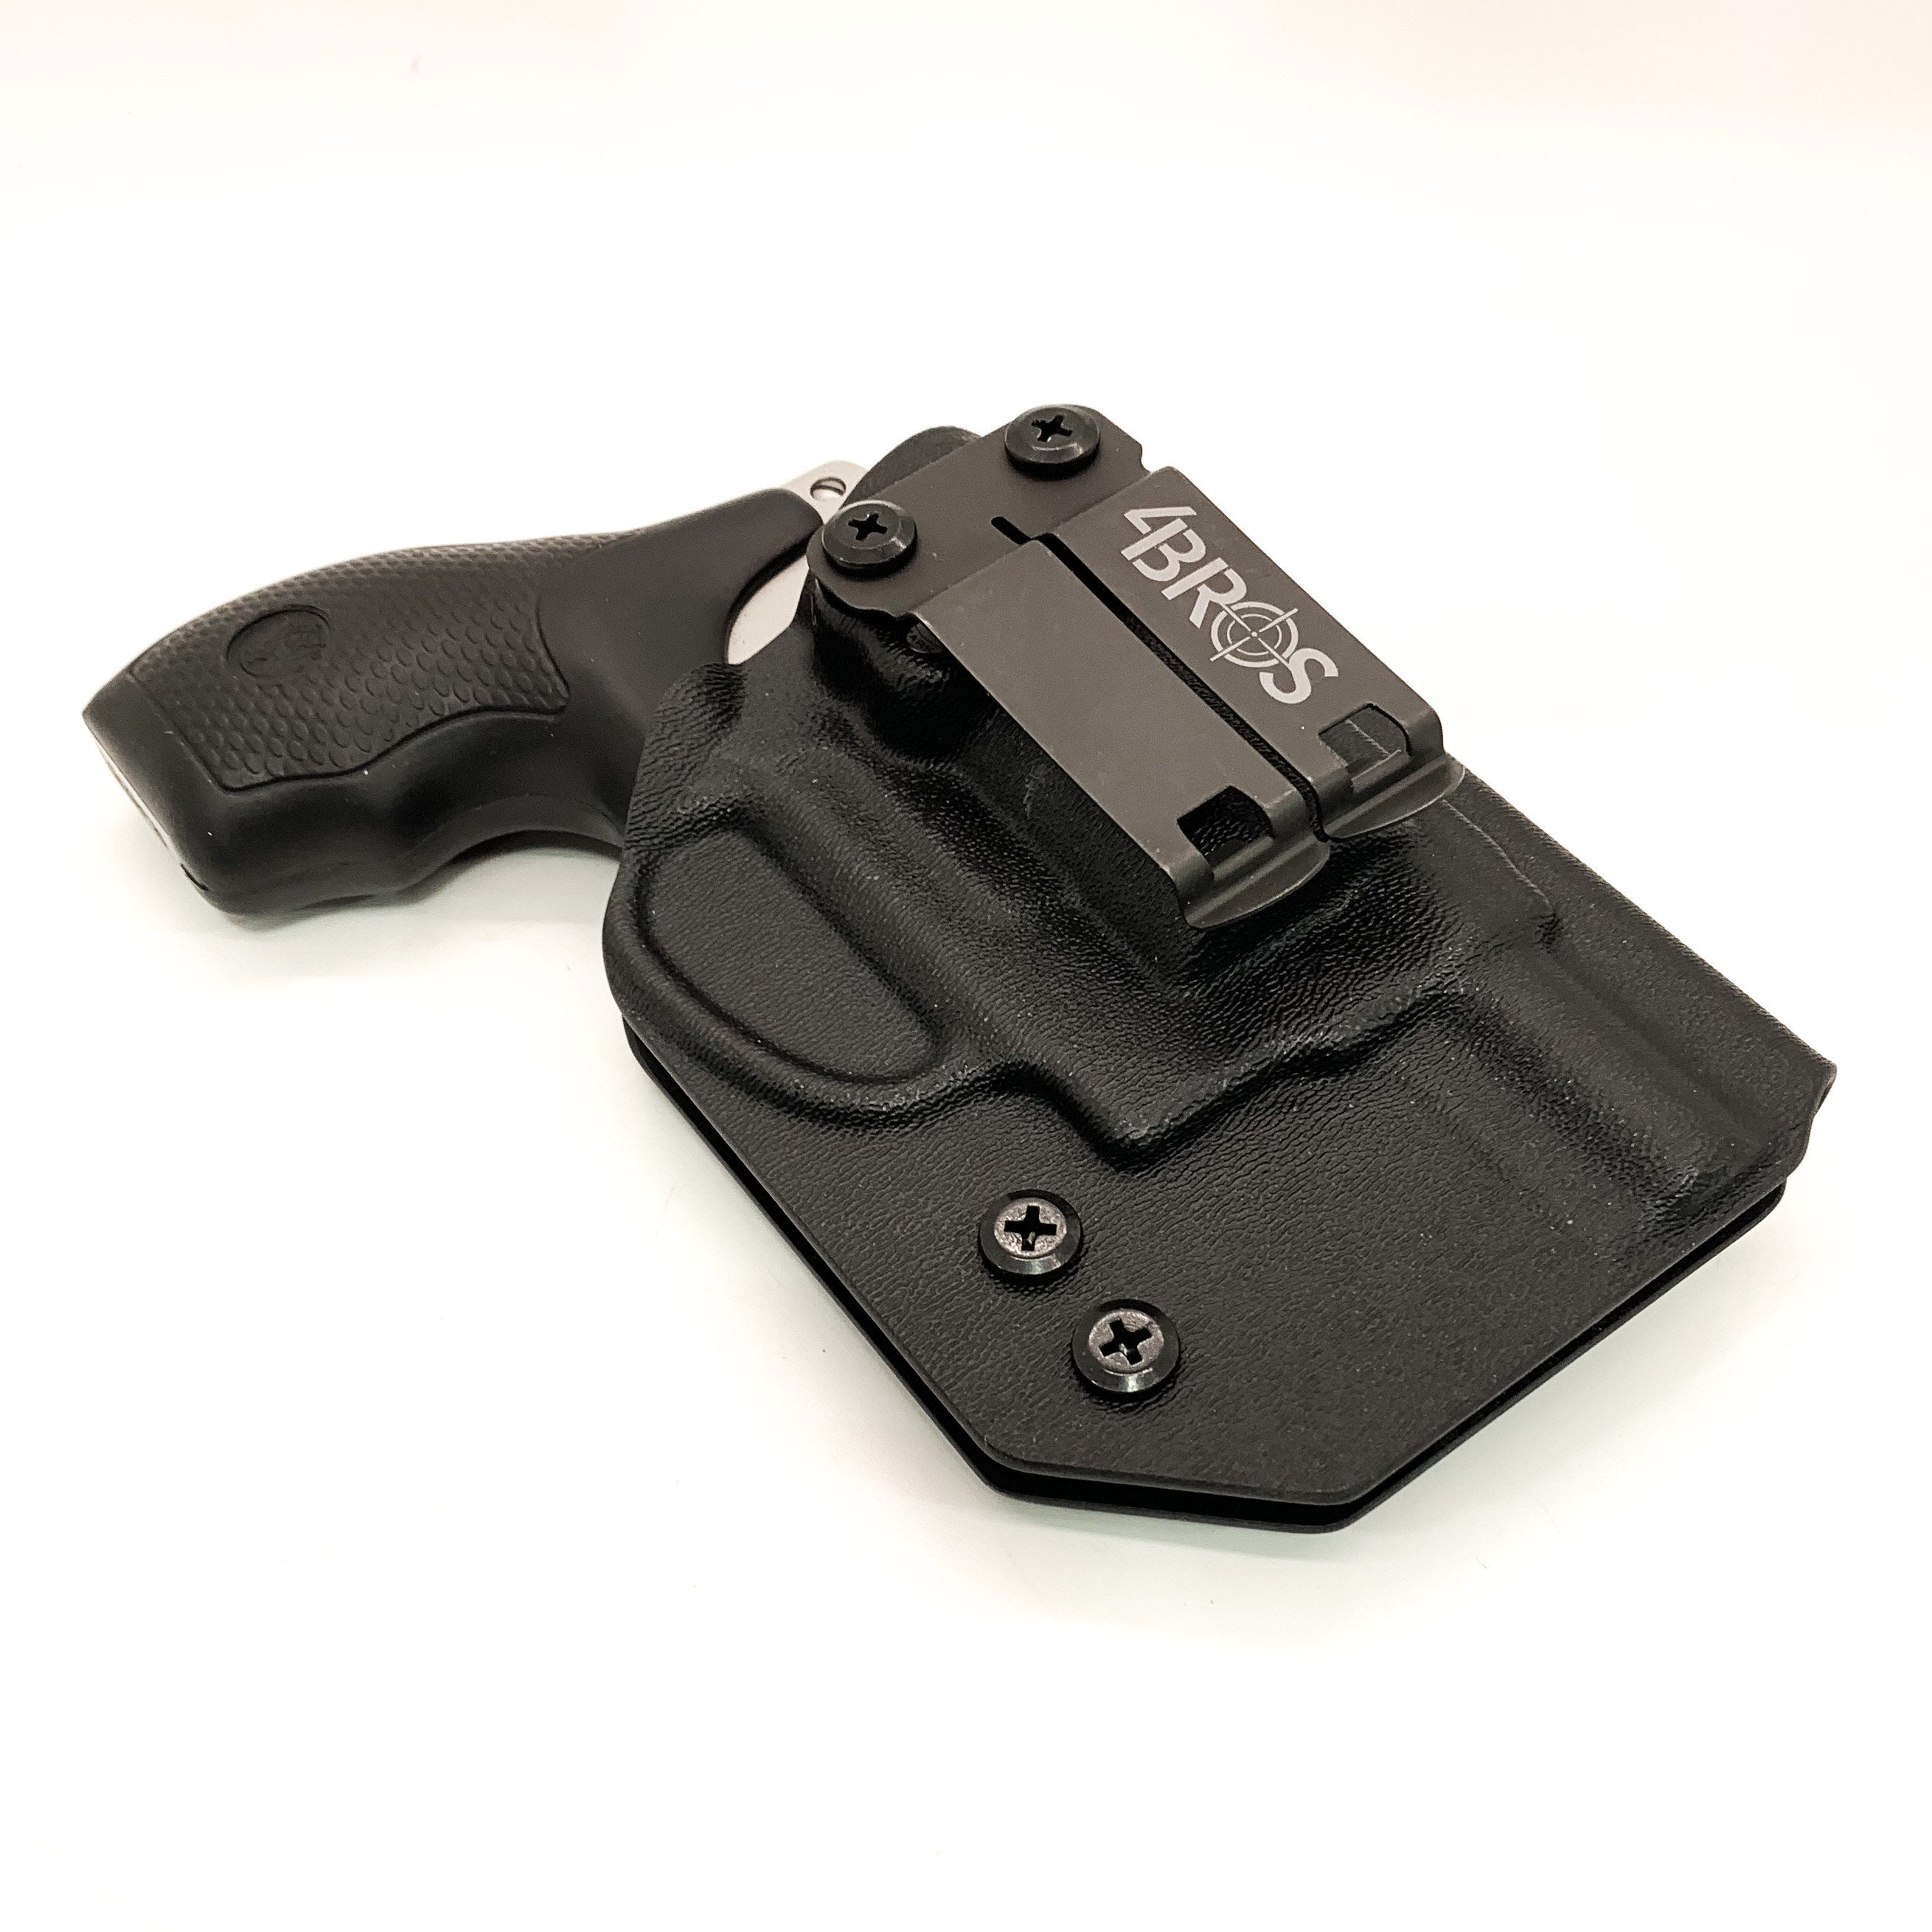 Inside Waistband Taco Style Holster for the Smith & Wesson J Frame Revolver Our holsters are vacuum formed with a precision machined mold designed from a CAD model of the actual firearm. Each holster is formed, trimmed, and folded in-house. Final fit and function tests are done with the actual pistol